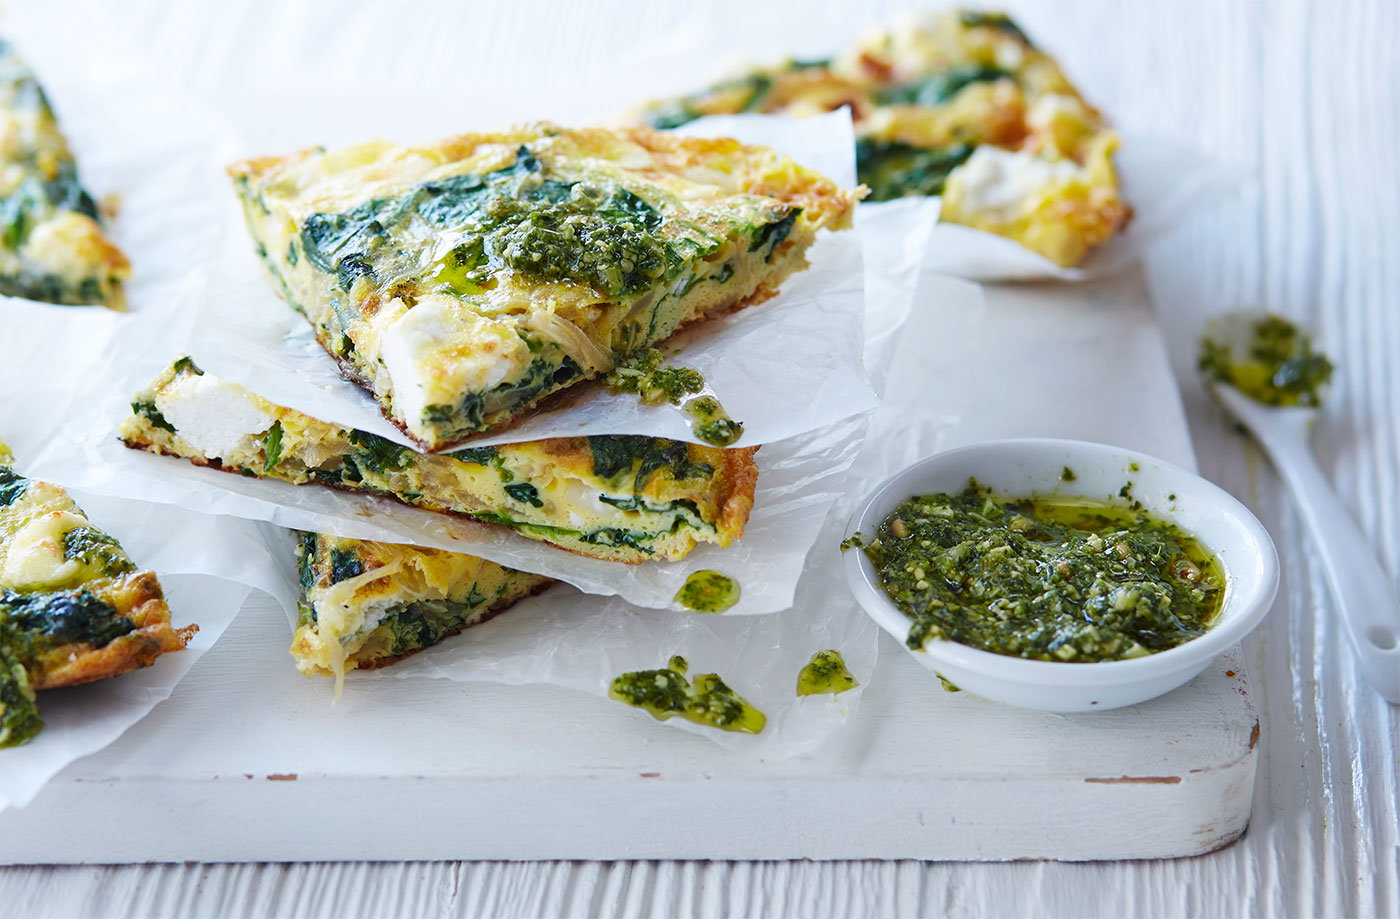 Spinach, pesto and goat's cheese frittata